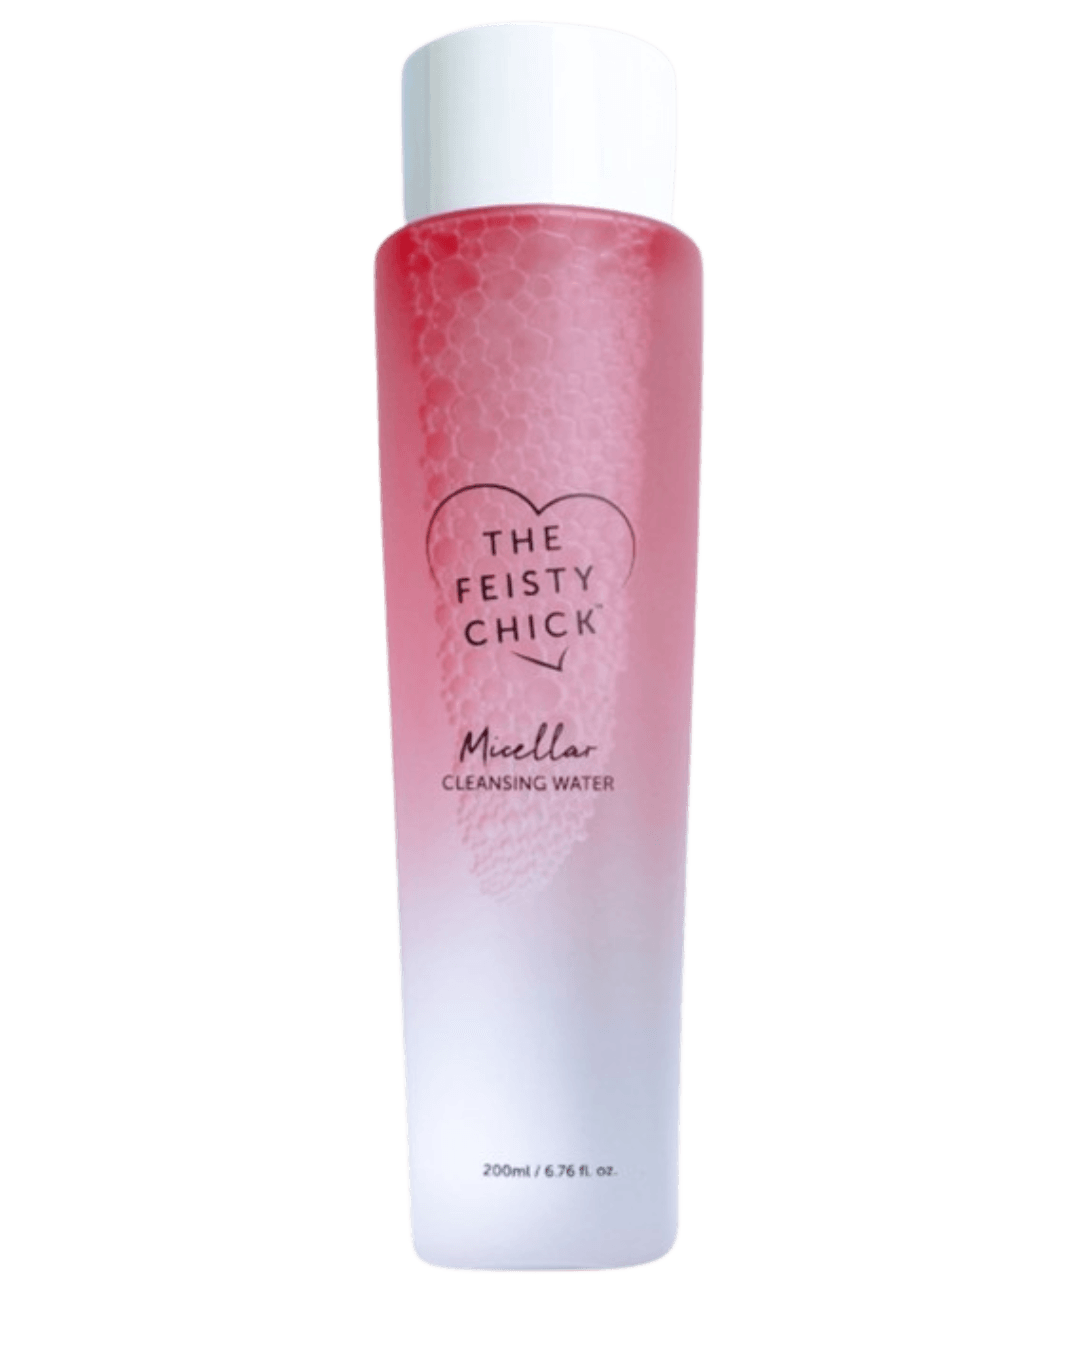 Daily Vanity Beauty Awards 2024 Best Make up The Feisty Chick Micellar Cleansing Water Voted By Beauty Experts